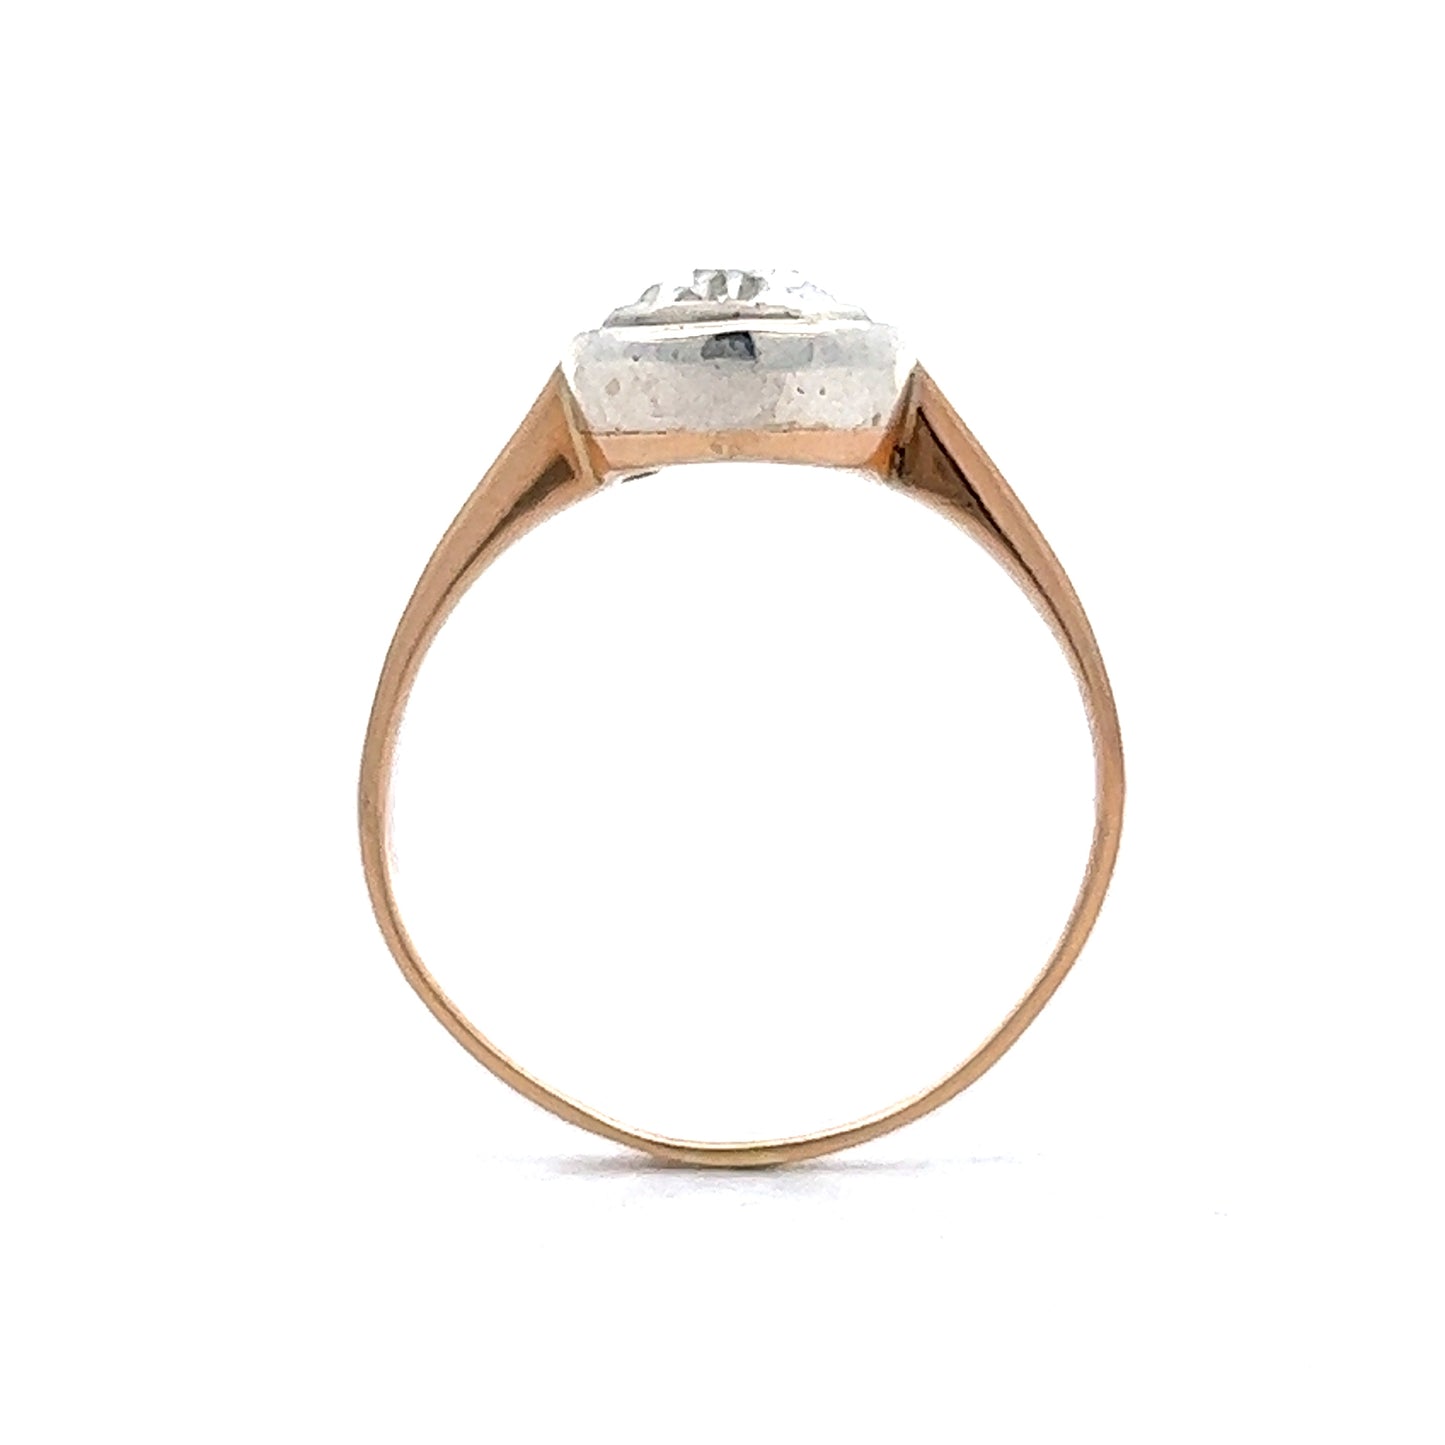 Victorian Pear Cut Diamond Engagement Ring in 14k Rose Gold & Sterling Silver